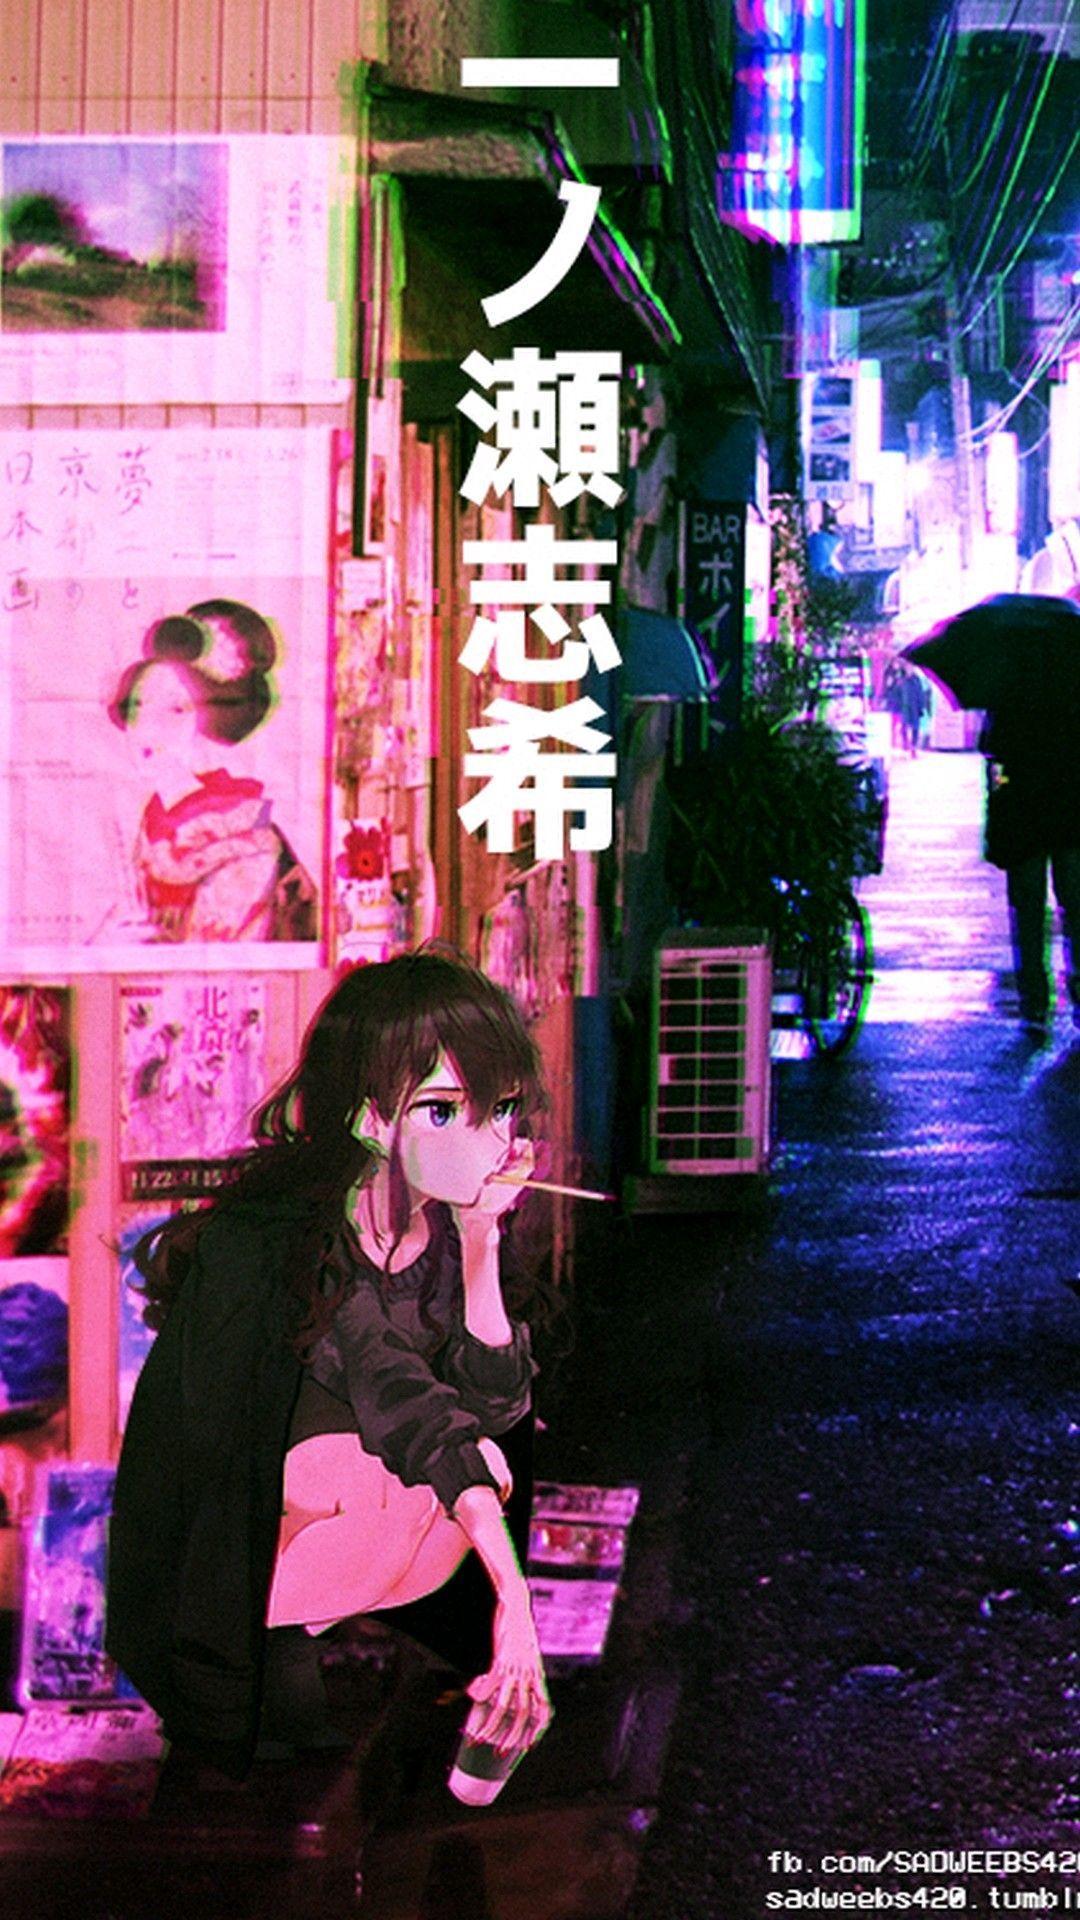 Aesthetic Anime VHS Wallpapers - Wallpaper Cave